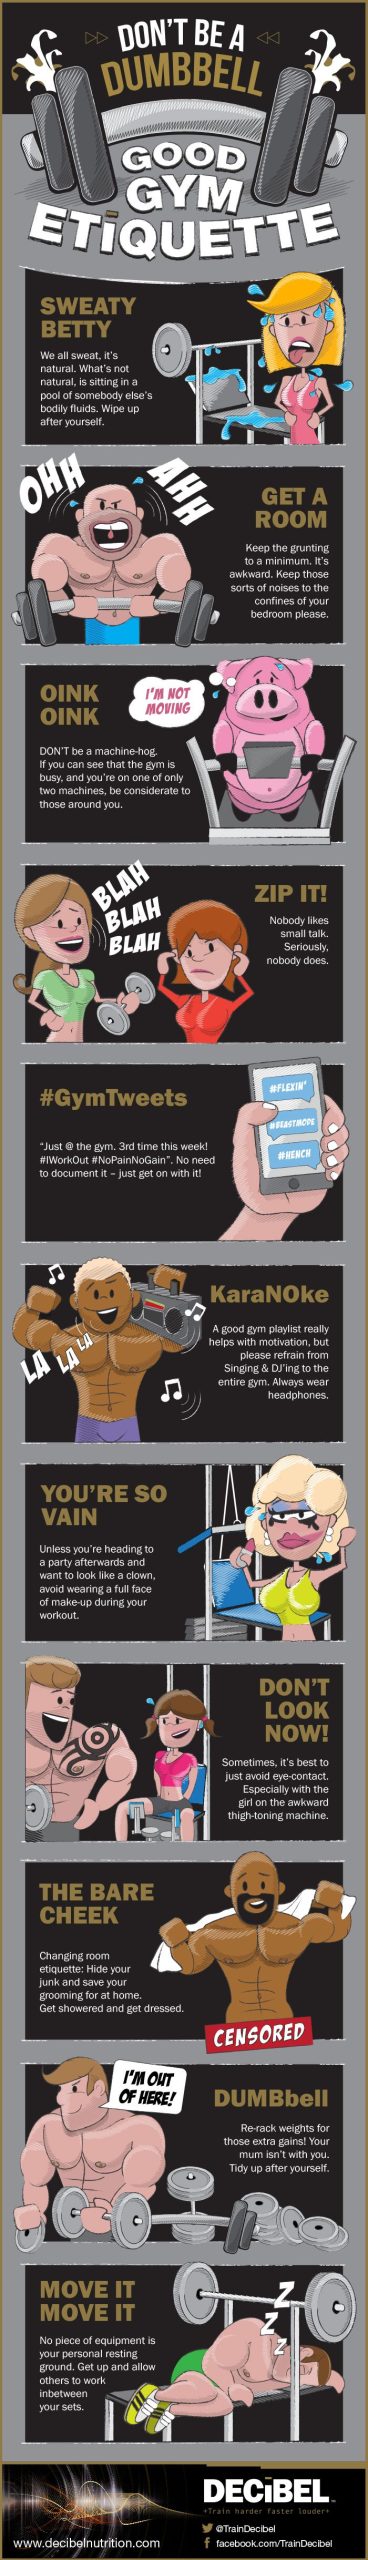 Don't Be a DUMB-bell: Good Gym Etiquette #infographic